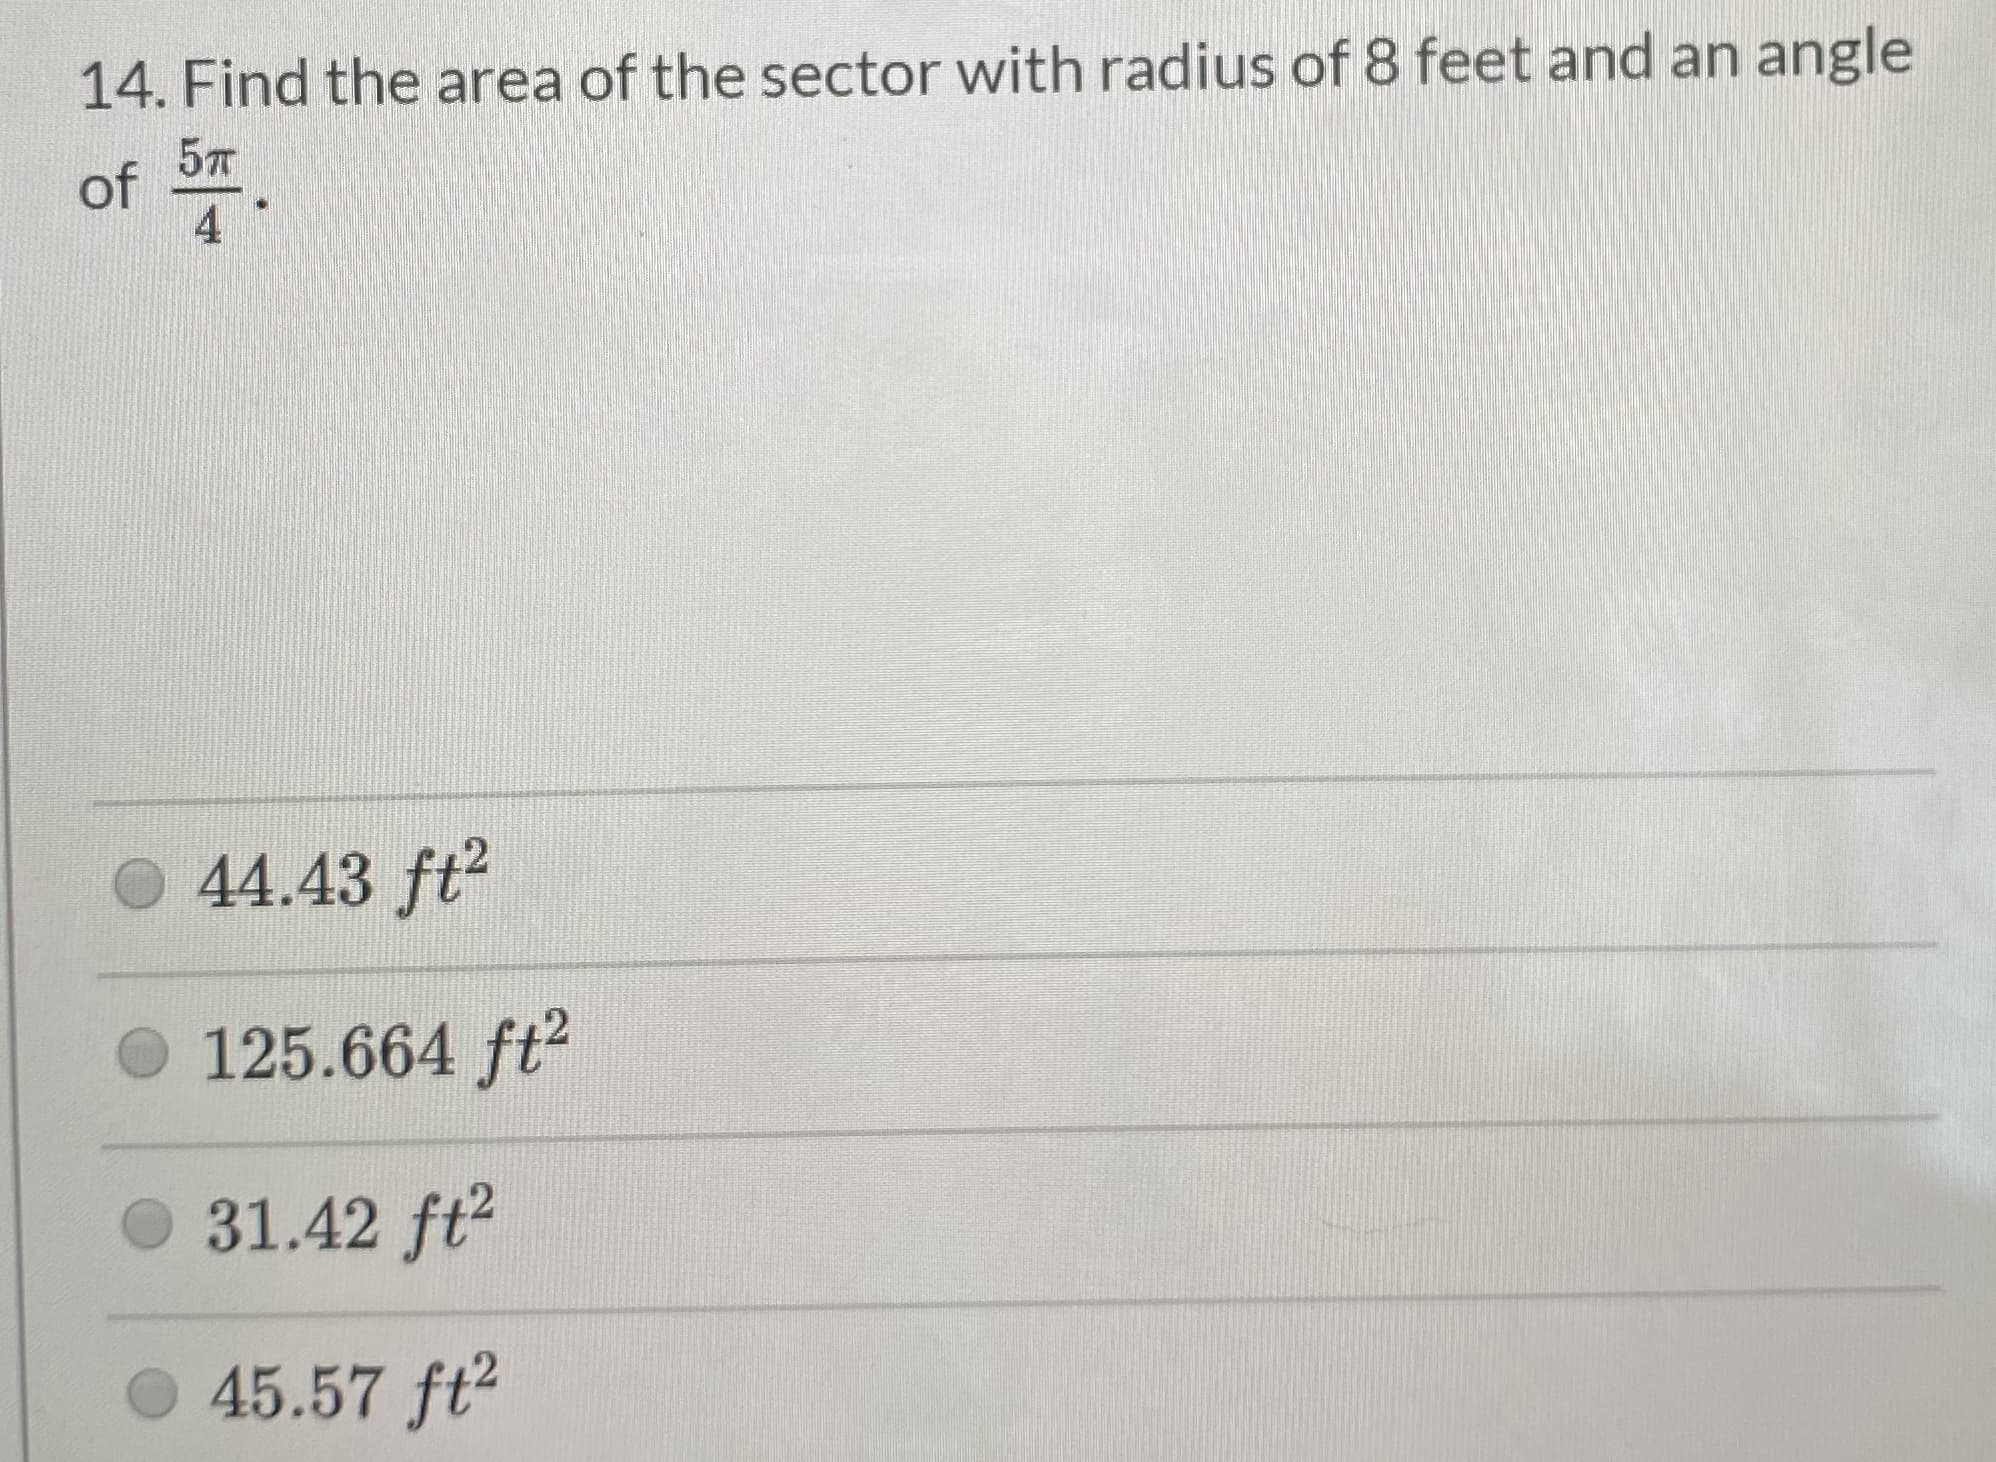 14. Find the area of the sector with radius of 8 feet and an angle
57
of
O 44.43 ft2
O 125.664 ft2
O 31.42 ft2
O 45.57 ft2
